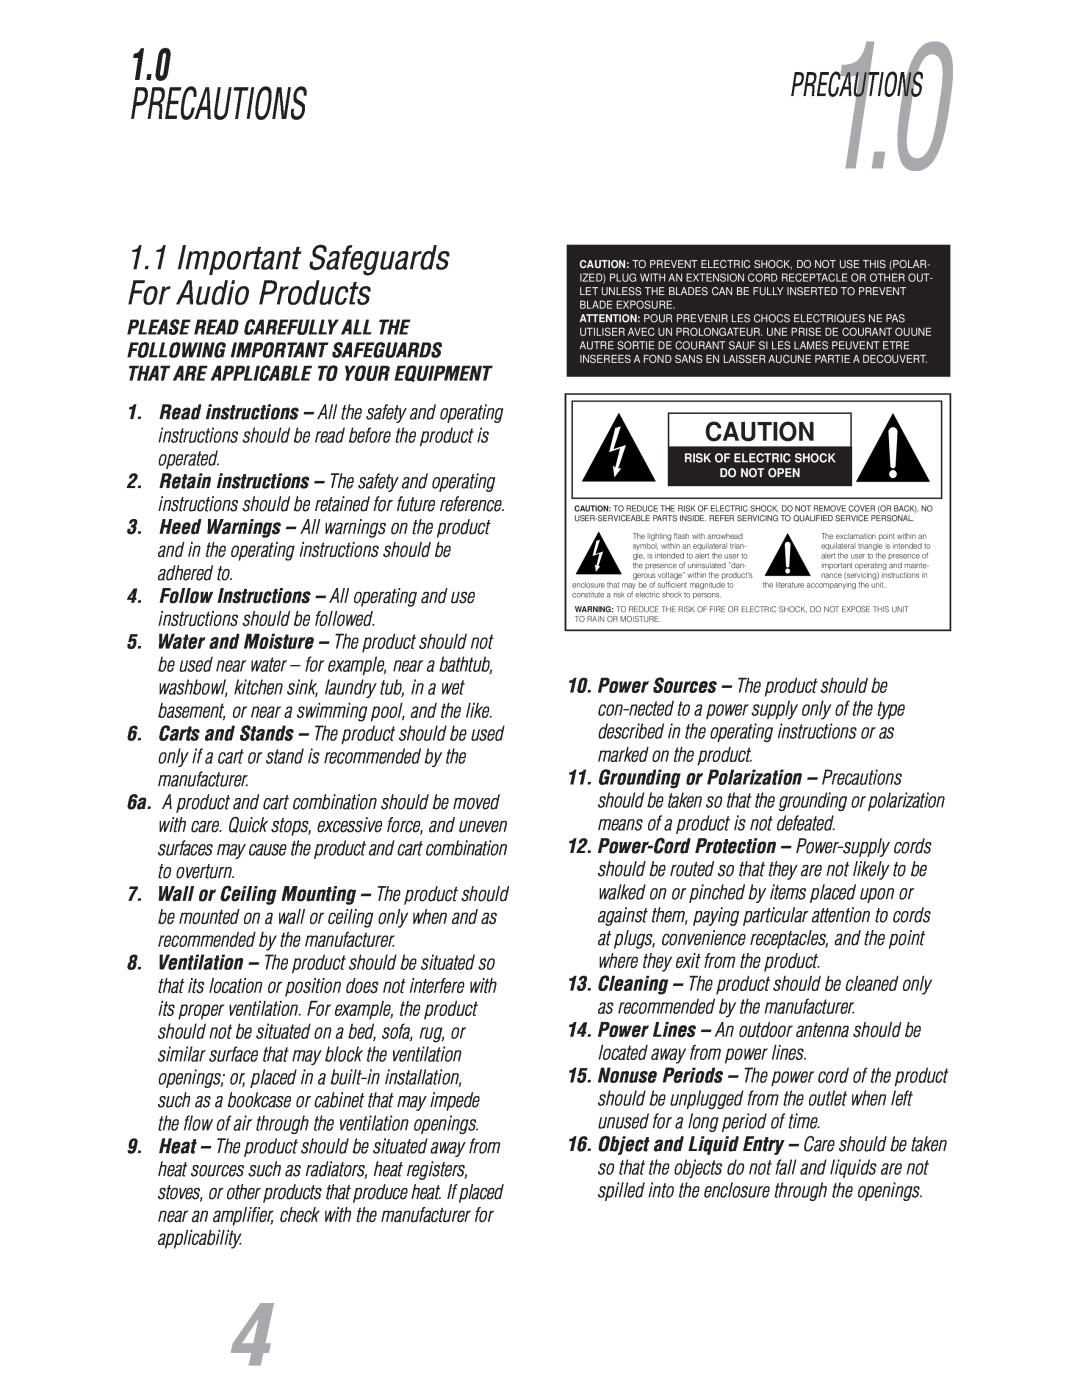 JBL S800 user manual Precautions, PRECAUTIONS1.0, 1.1Important Safeguards For Audio Products 